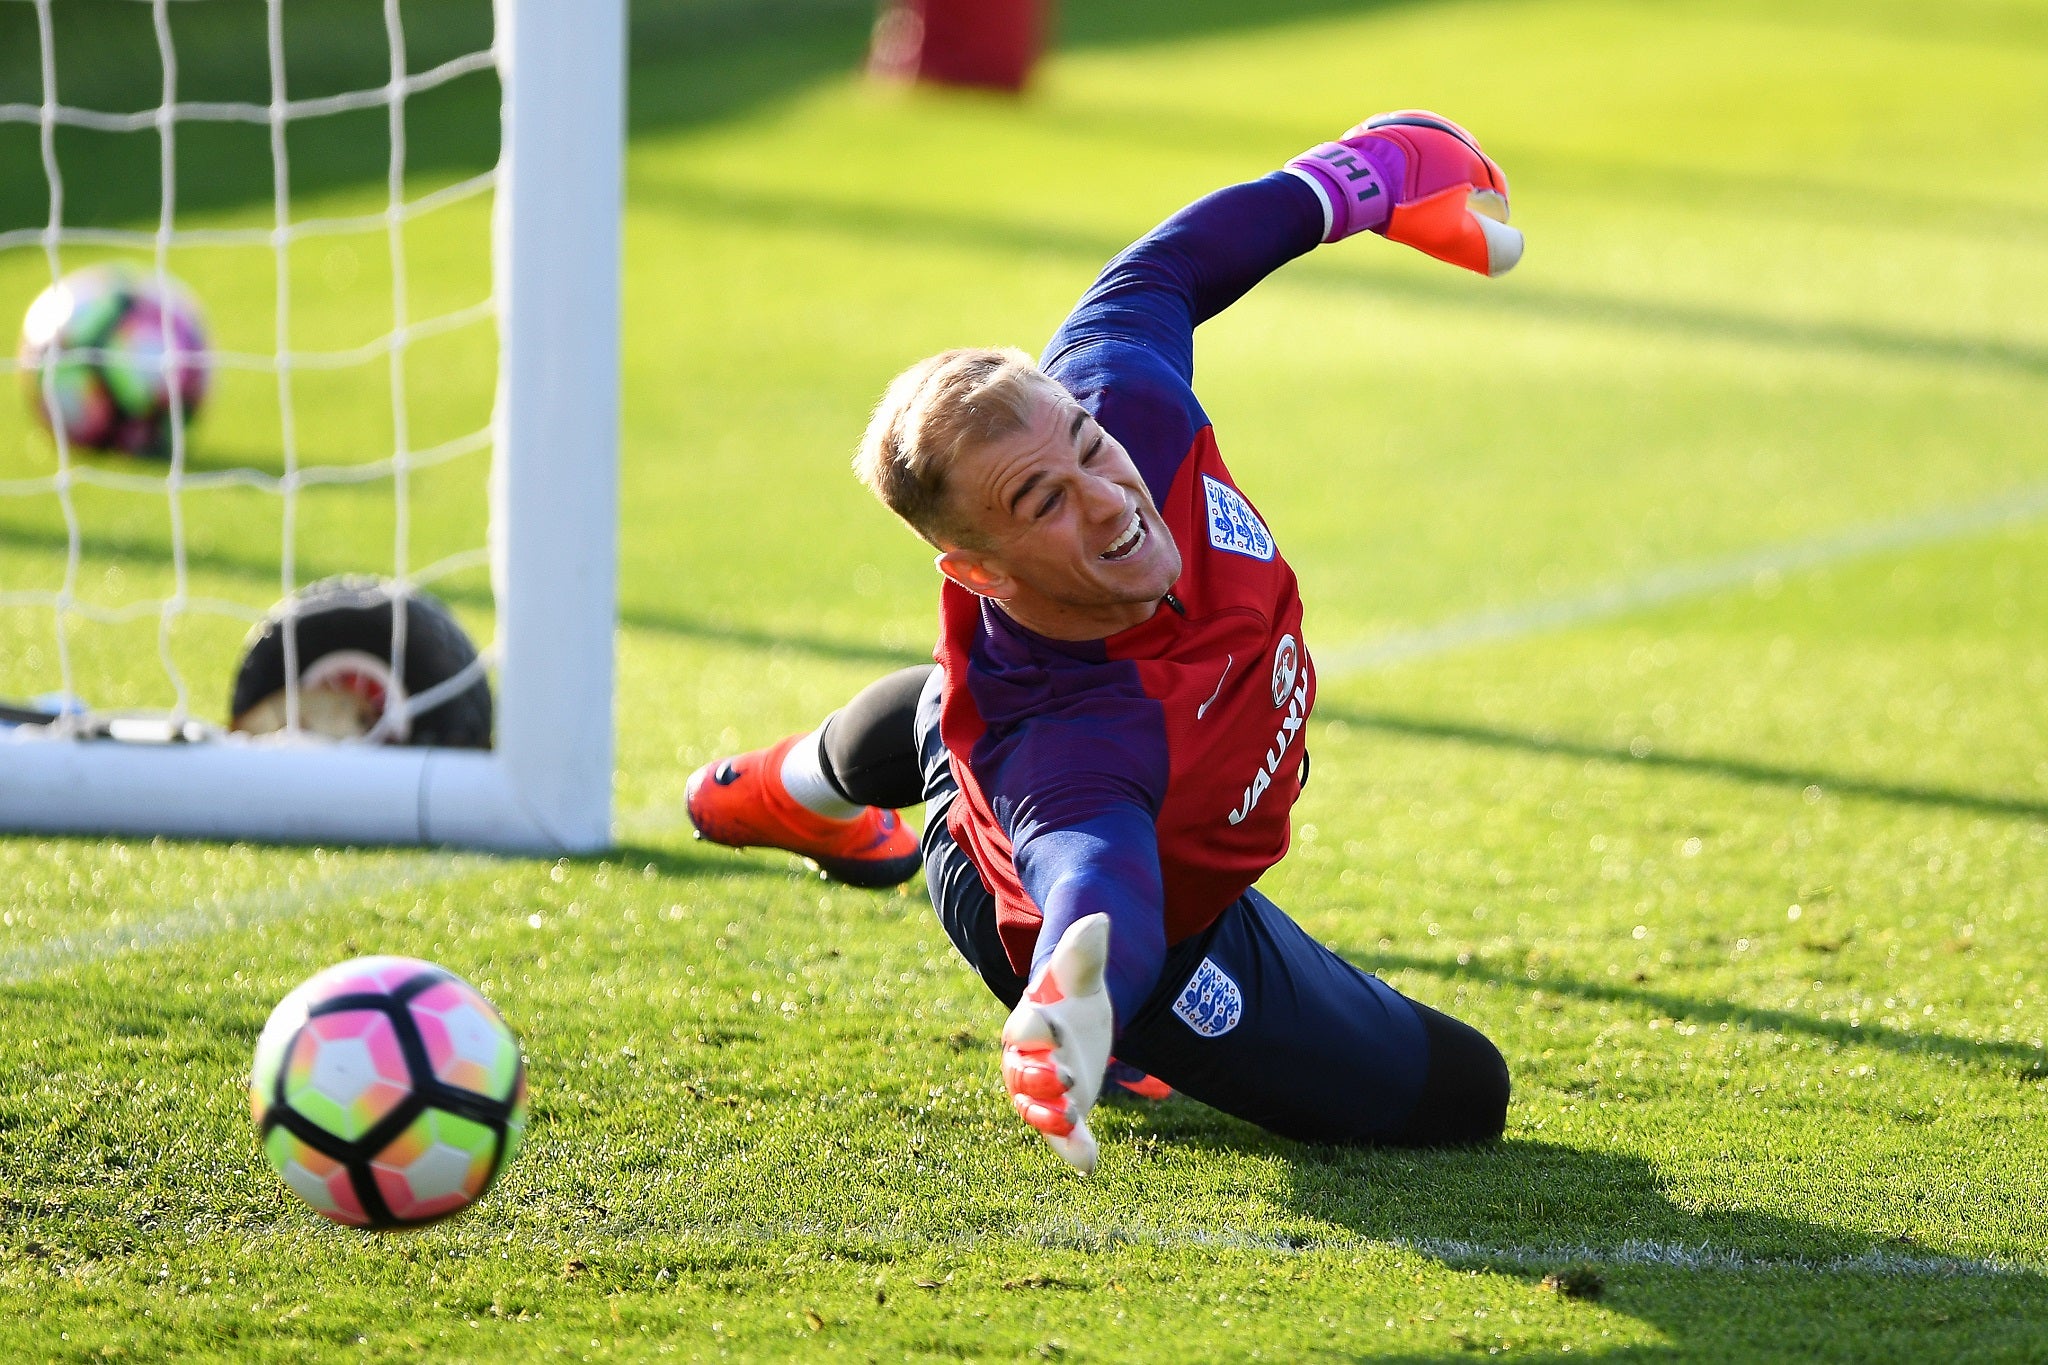 Joe Hart has changed his mental approach after a chastening summer